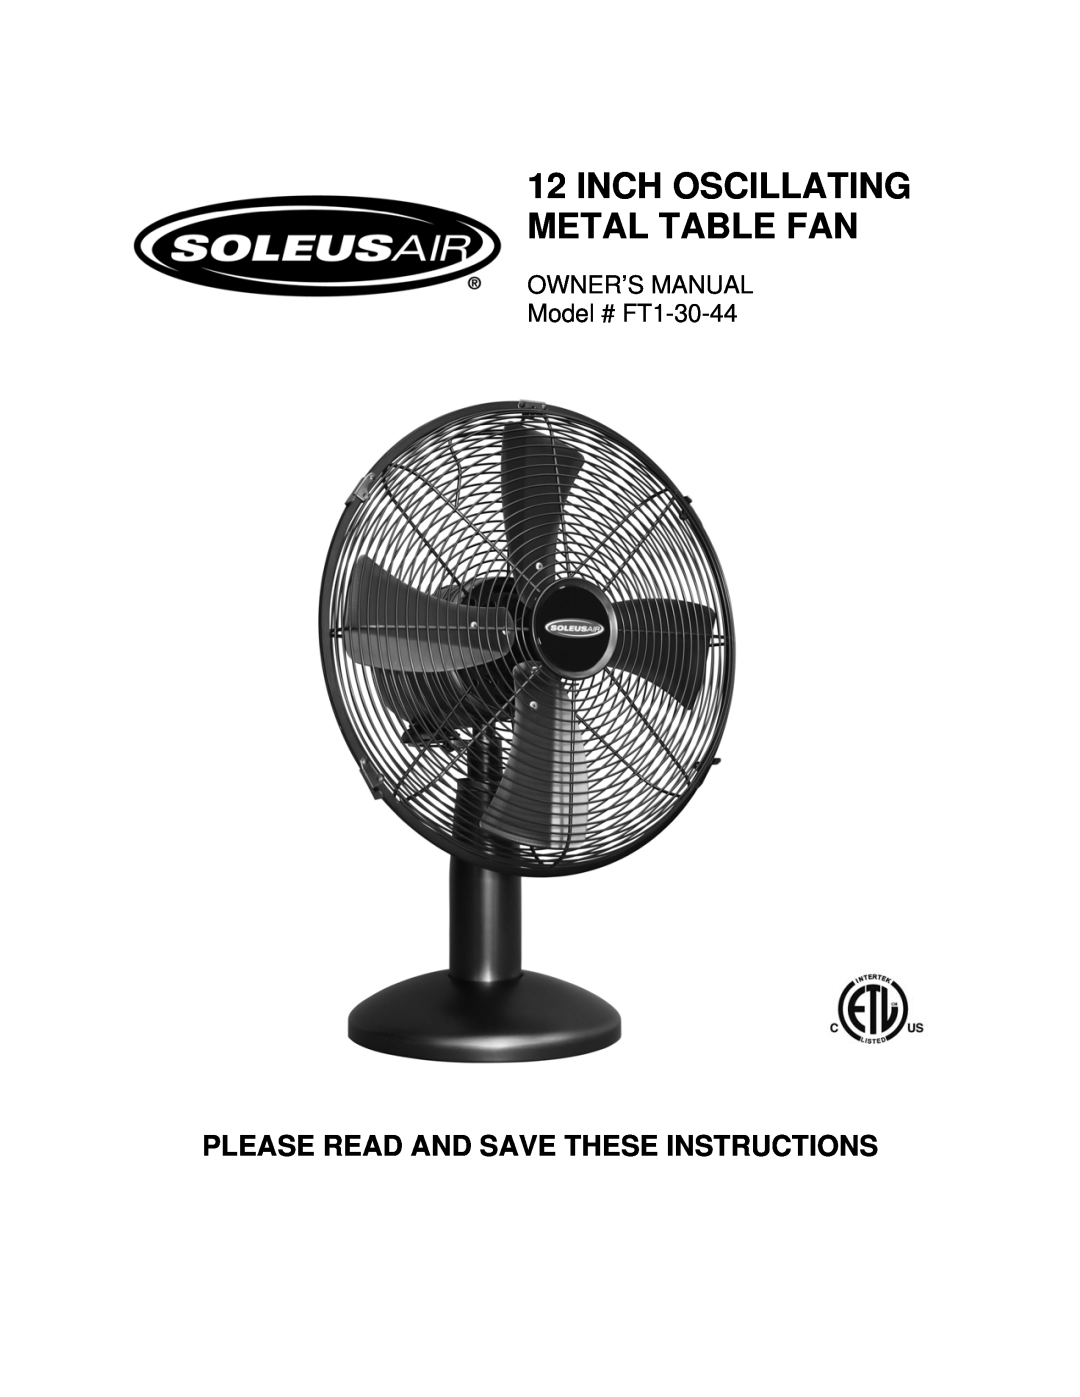 Soleus Air FT1-30-44 owner manual Inch Oscillating Metal Table Fan, Please Read And Save These Instructions 